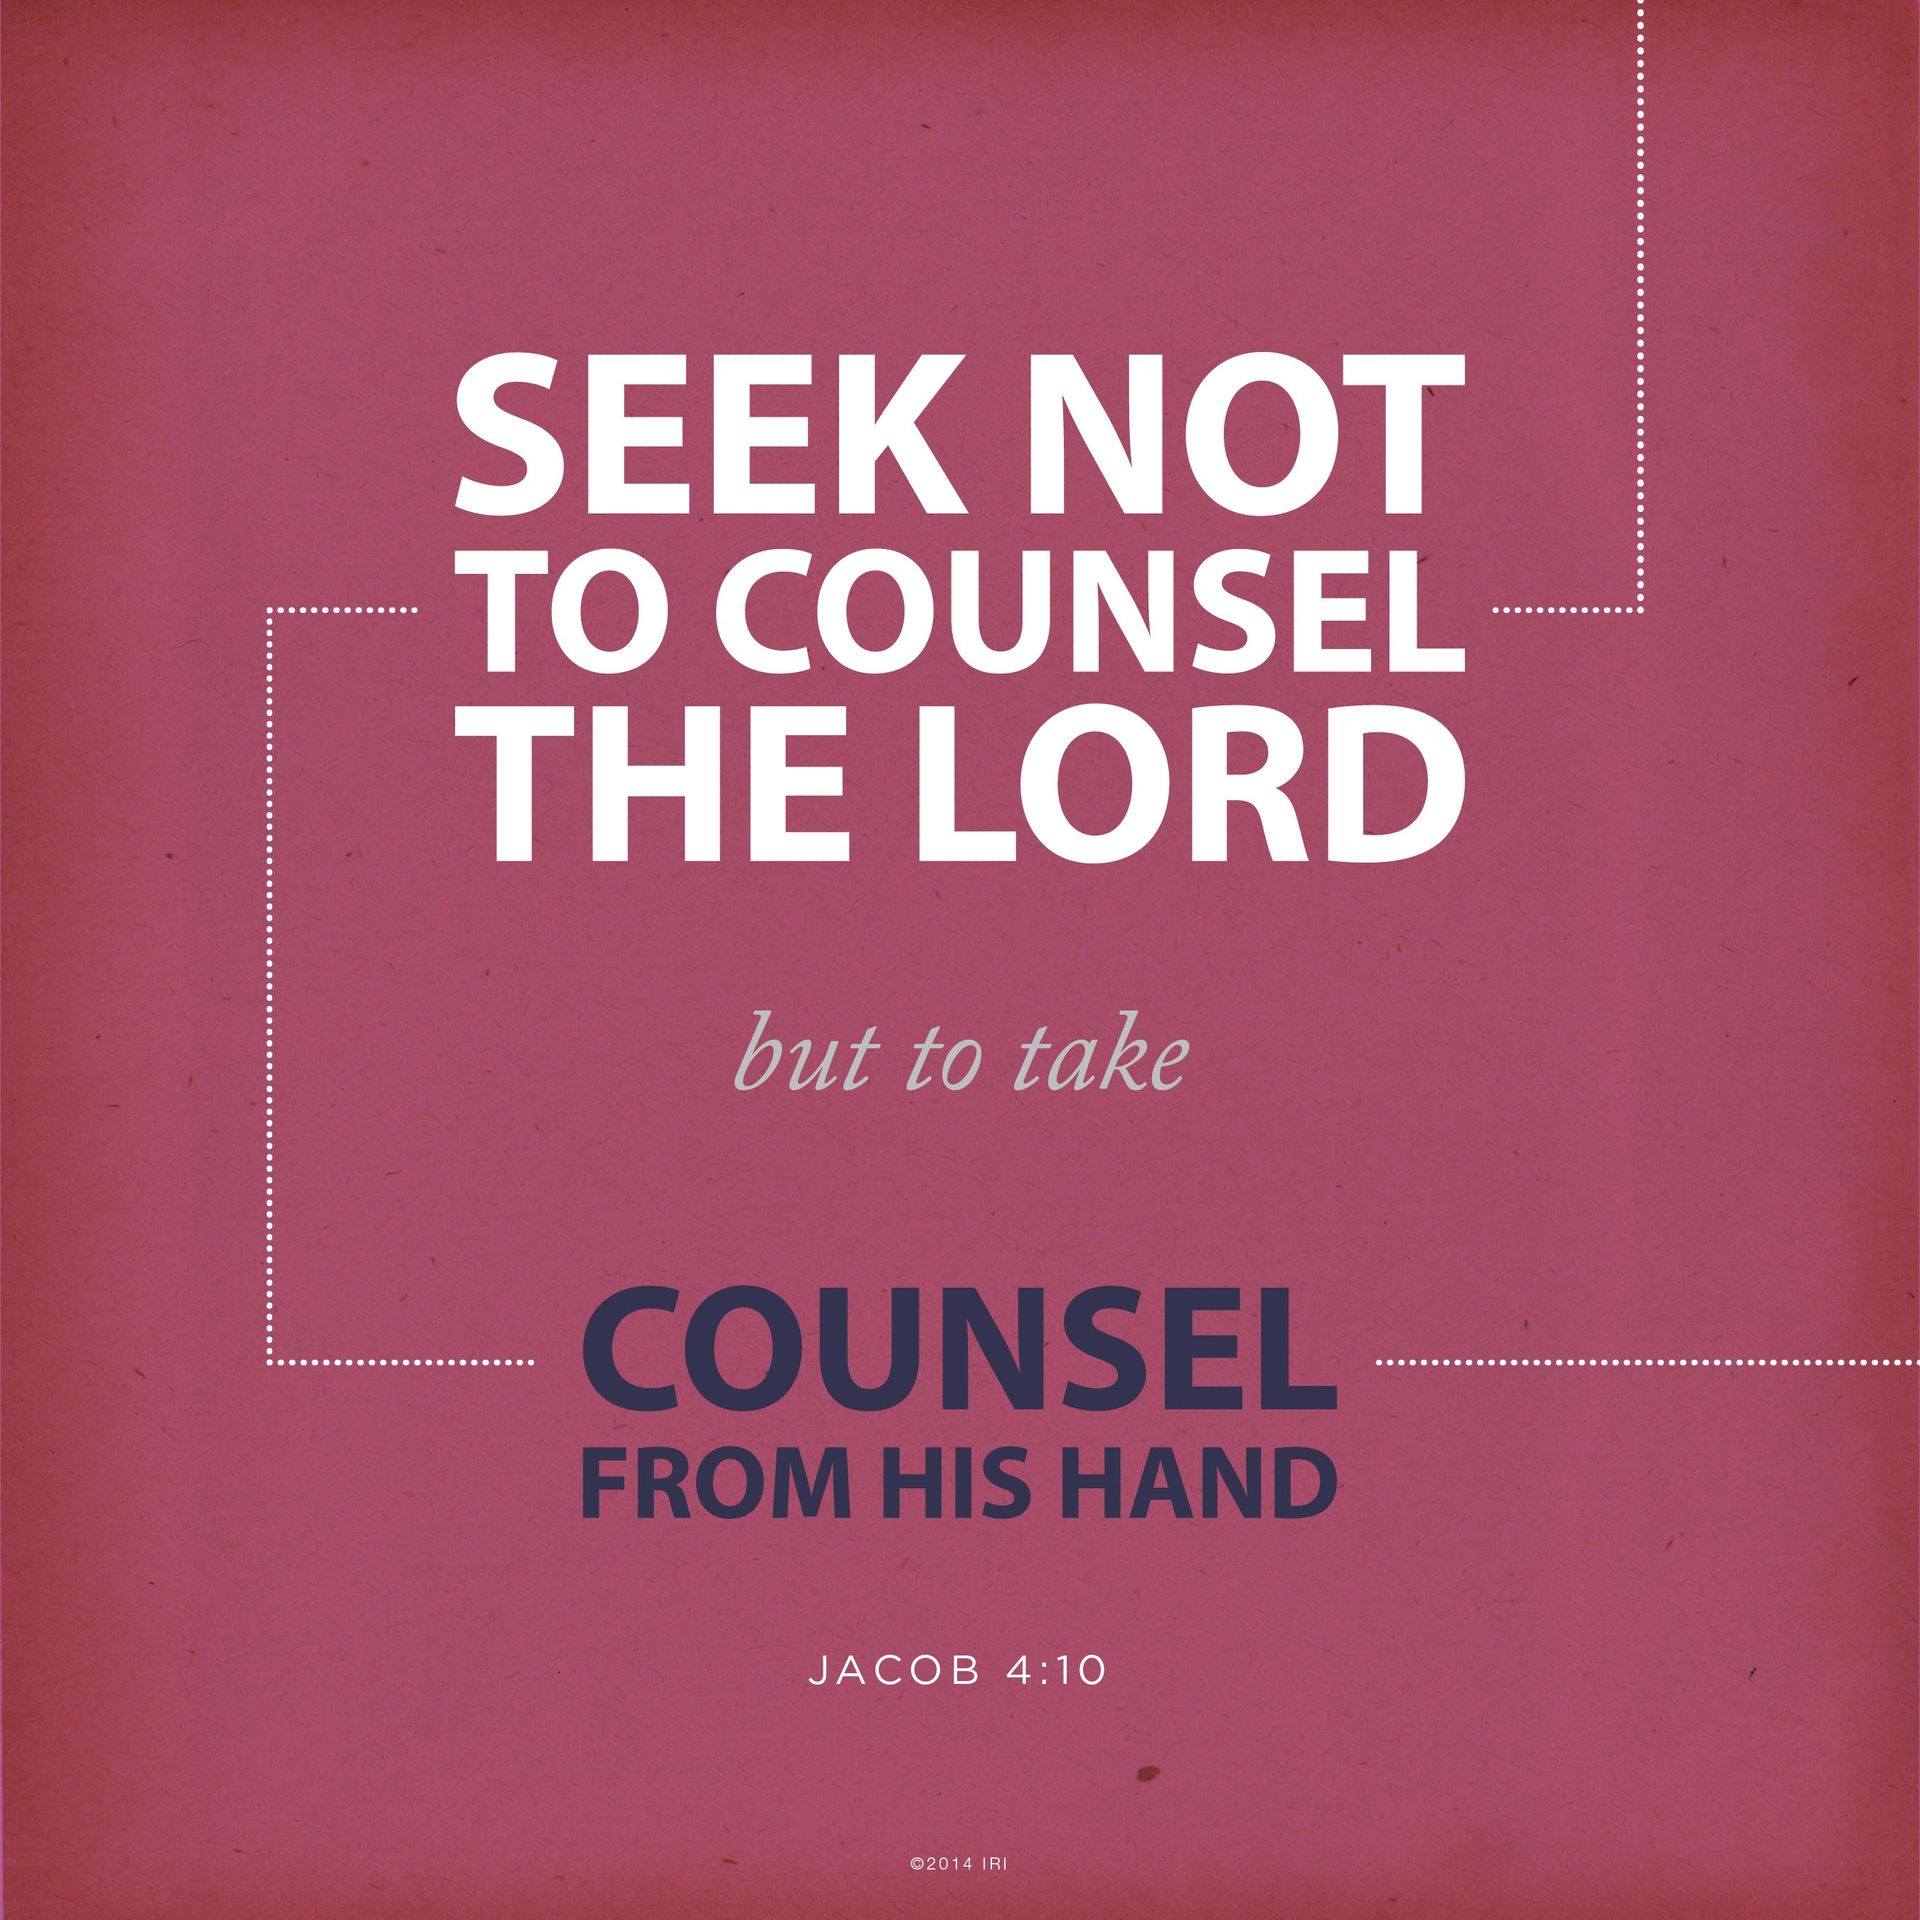 “Seek not to counsel the Lord, but to take counsel from his hand.”—Jacob 4:10